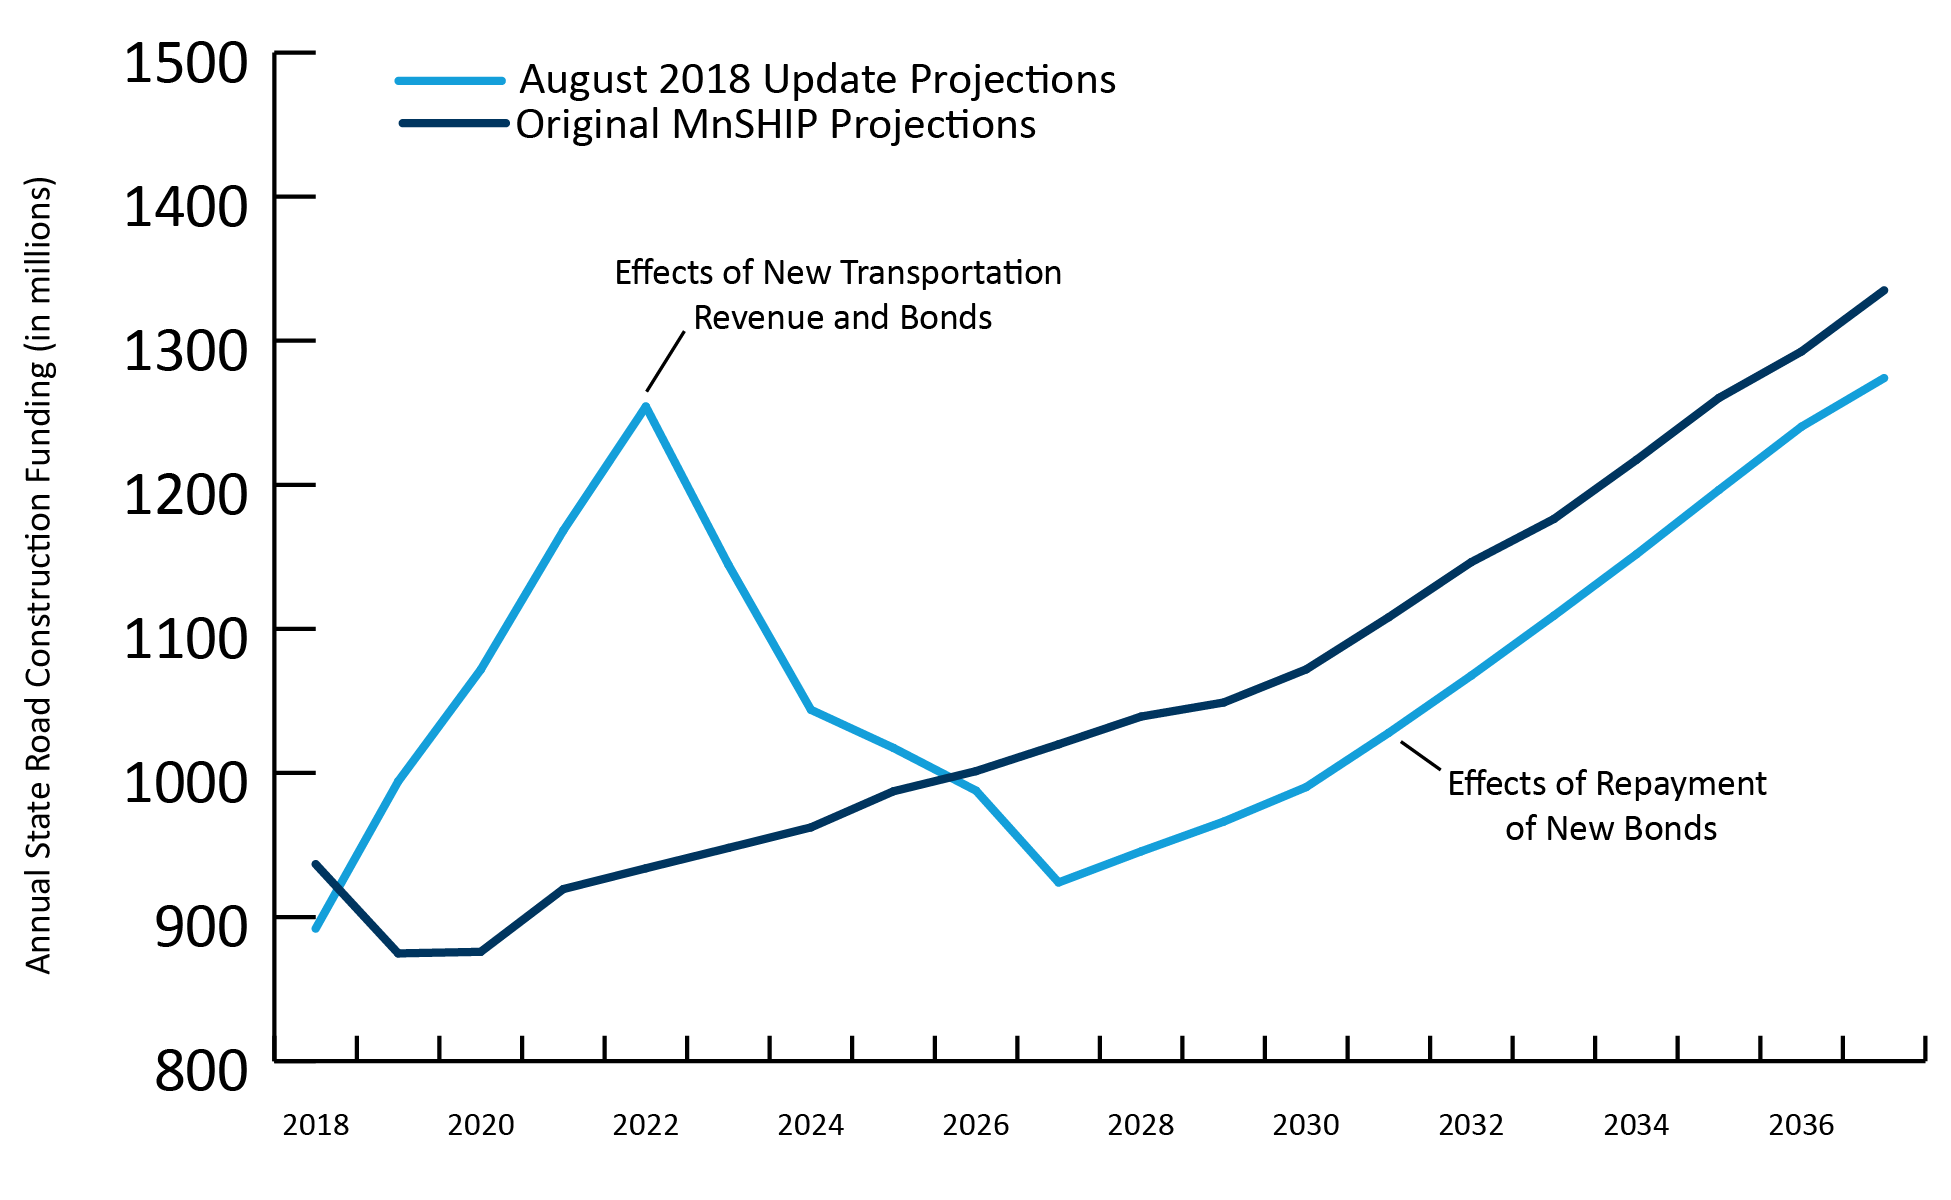 Comparison of Original Funding Projections and August 2018 Updated Projections, showing a spike in August 2018 Update projections in 2022 due to the effects of new transportation revenue and bods, and an upward trend starting in 2028 due to the effects of